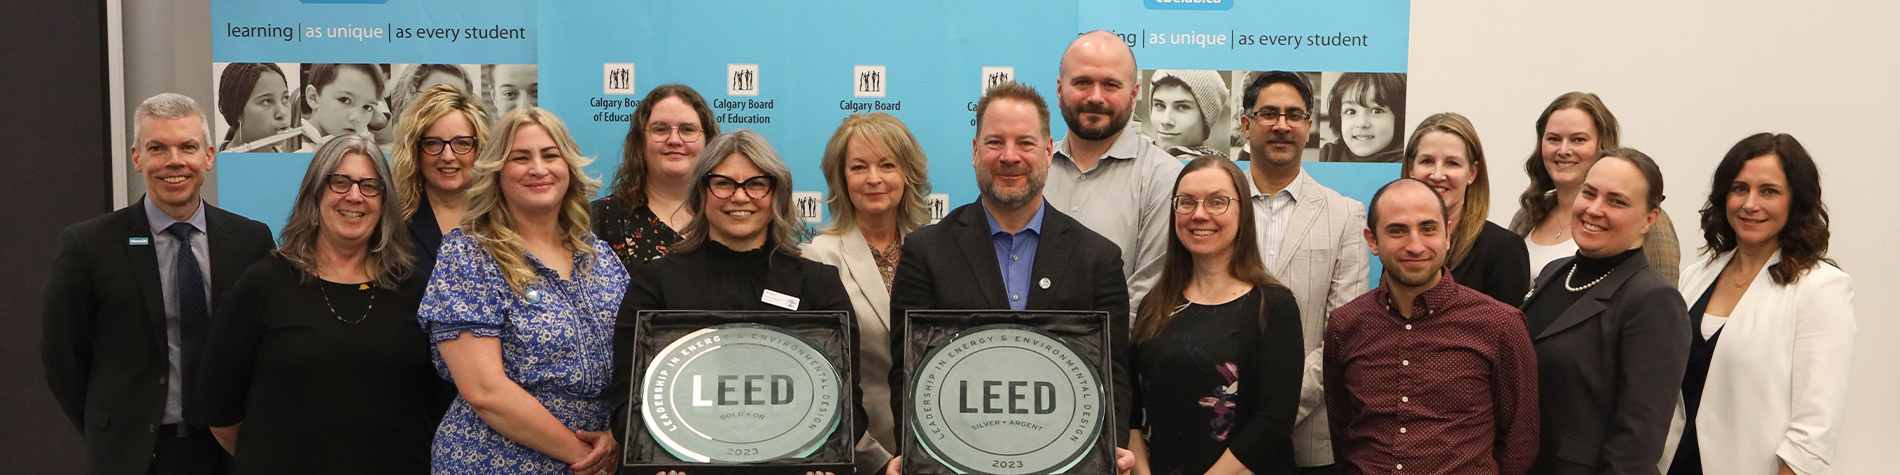 <p class="slider-title">The CBE is Celebrating LEED Designation for Mahogany and Lakeshore Schools</p><div class="banner-line"></div><p class="slider-subtitle">The Calgary Board of Education is celebrating two new schools that have achieved a LEED designation by the Canada Green Building Council (CAGBA).</p> <a style="pointer-events:all" class=AEBannerMoreLink href="https://cbe.ab.ca/news-centre/Pages/the-calgary-board-of-education-is-celebrating-leed-designation-for-mahogany-and-lakeshore-schools.aspx">Read More</a>